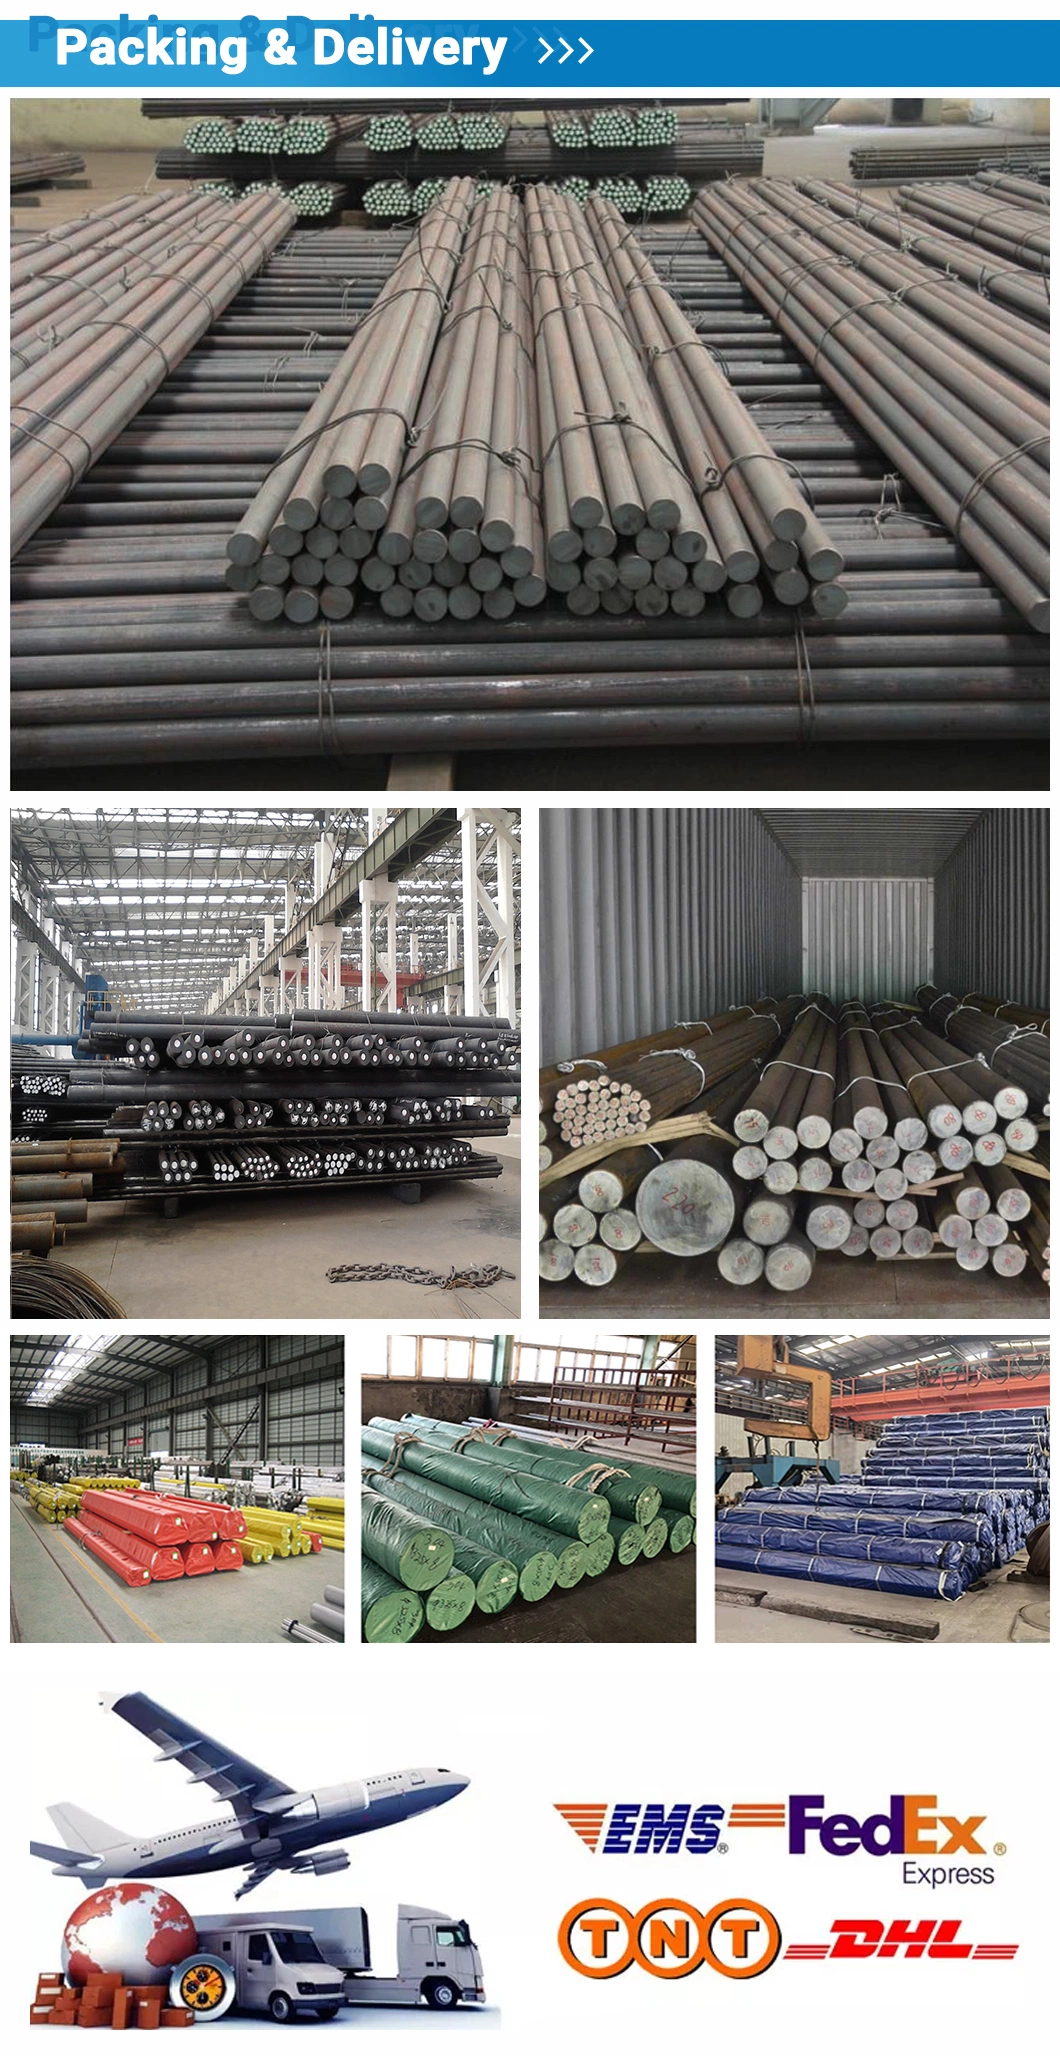 Q195 Q215 Q235 Q275 Carbon Steel Round Bar with High Quality for Building Construction